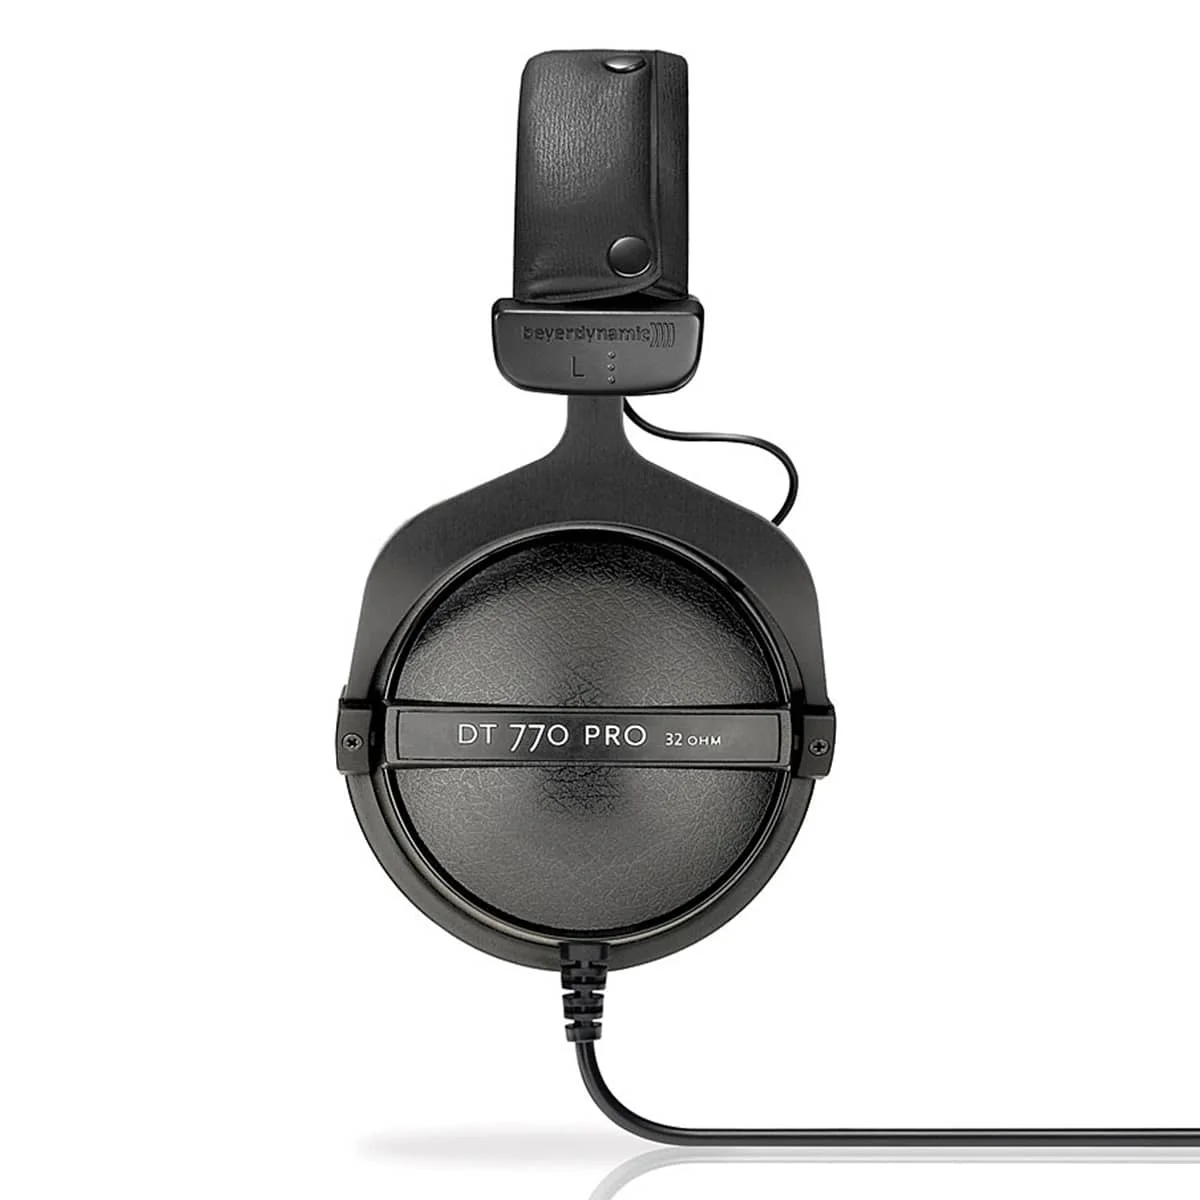 for Beyerdynamic DT 770 PRO Over-Ear Studio Headphones in Gray. Enclosed design, wired for professional recording and monitoring